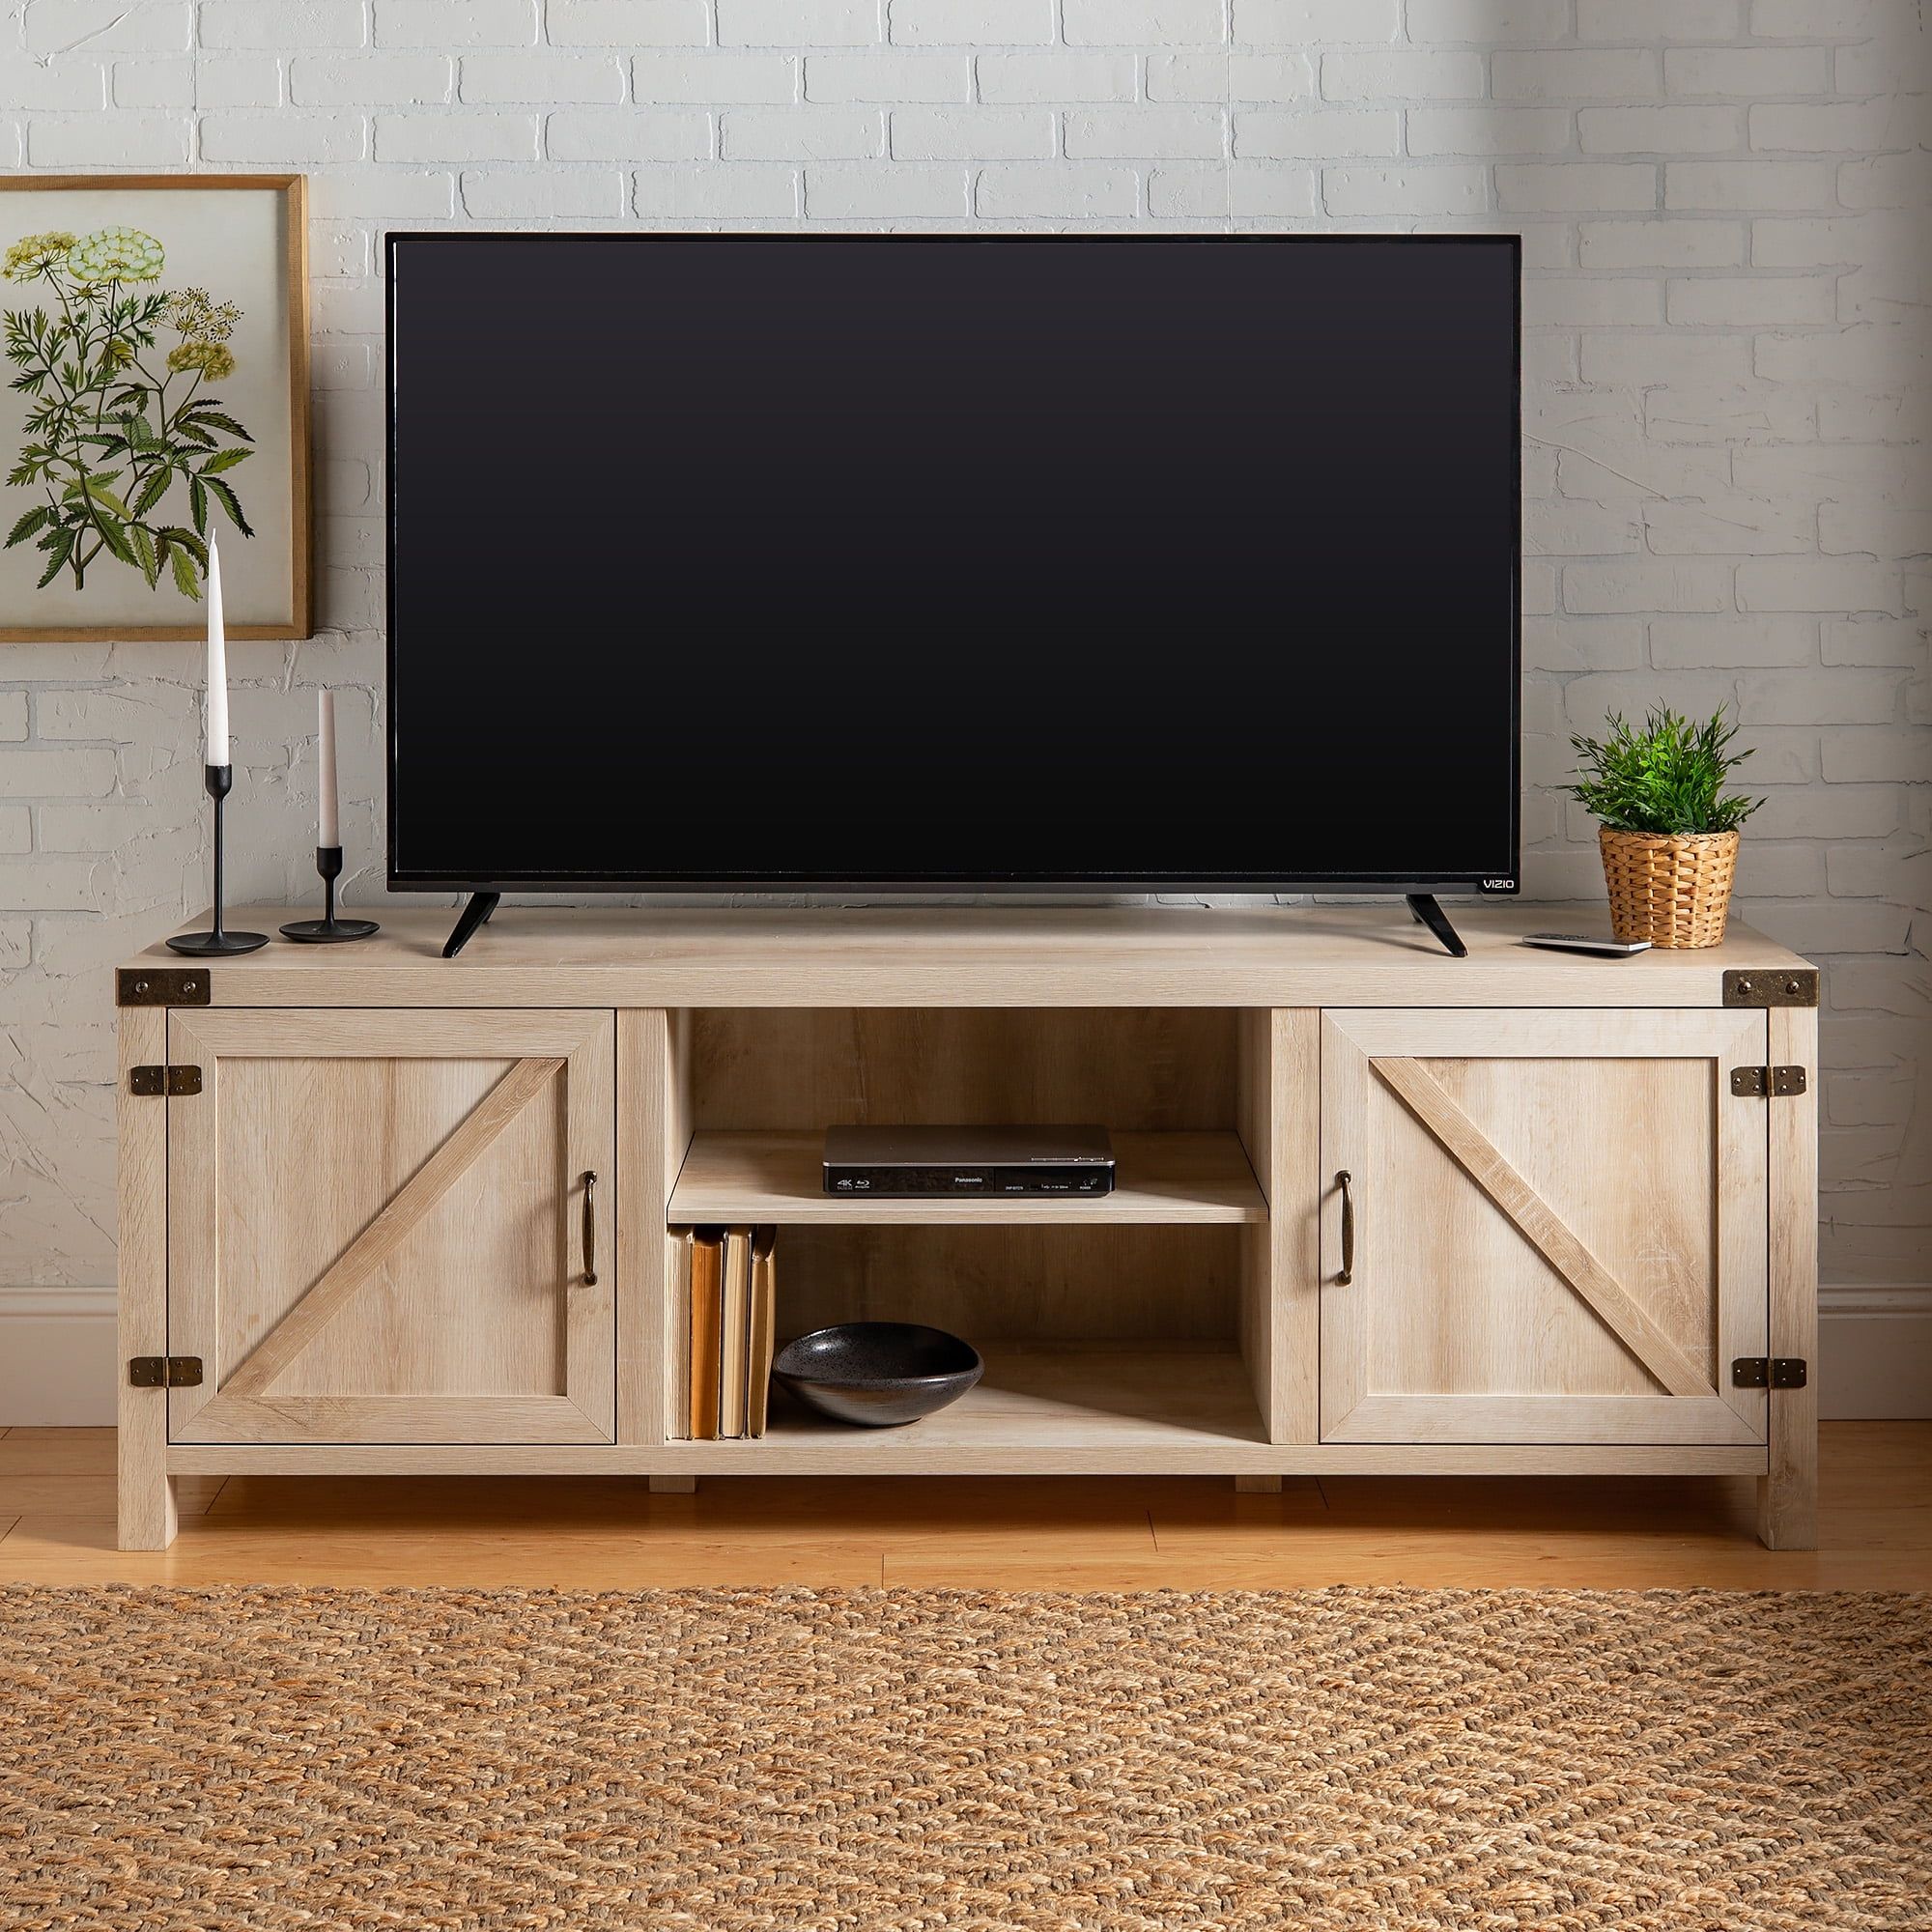 Woven Paths Farmhouse Barn Door Tv Stand For Tvs Up To 80", White Oak For Farmhouse Tv Stands For 70 Inch Tv (Gallery 13 of 20)